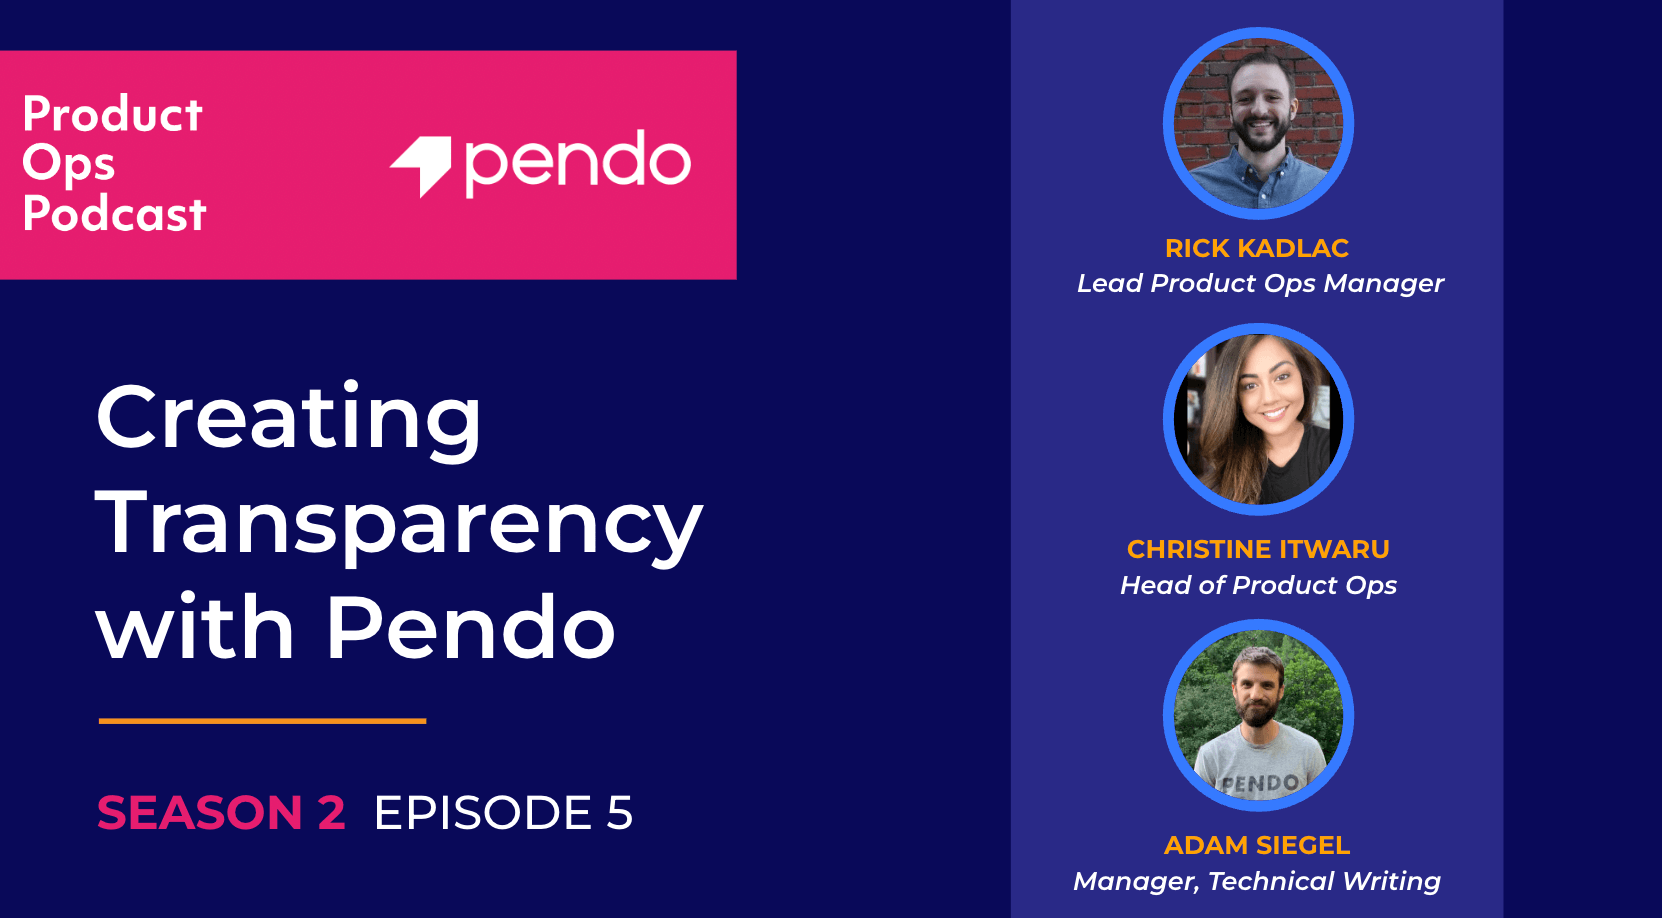 Creating transparency, with Pendo